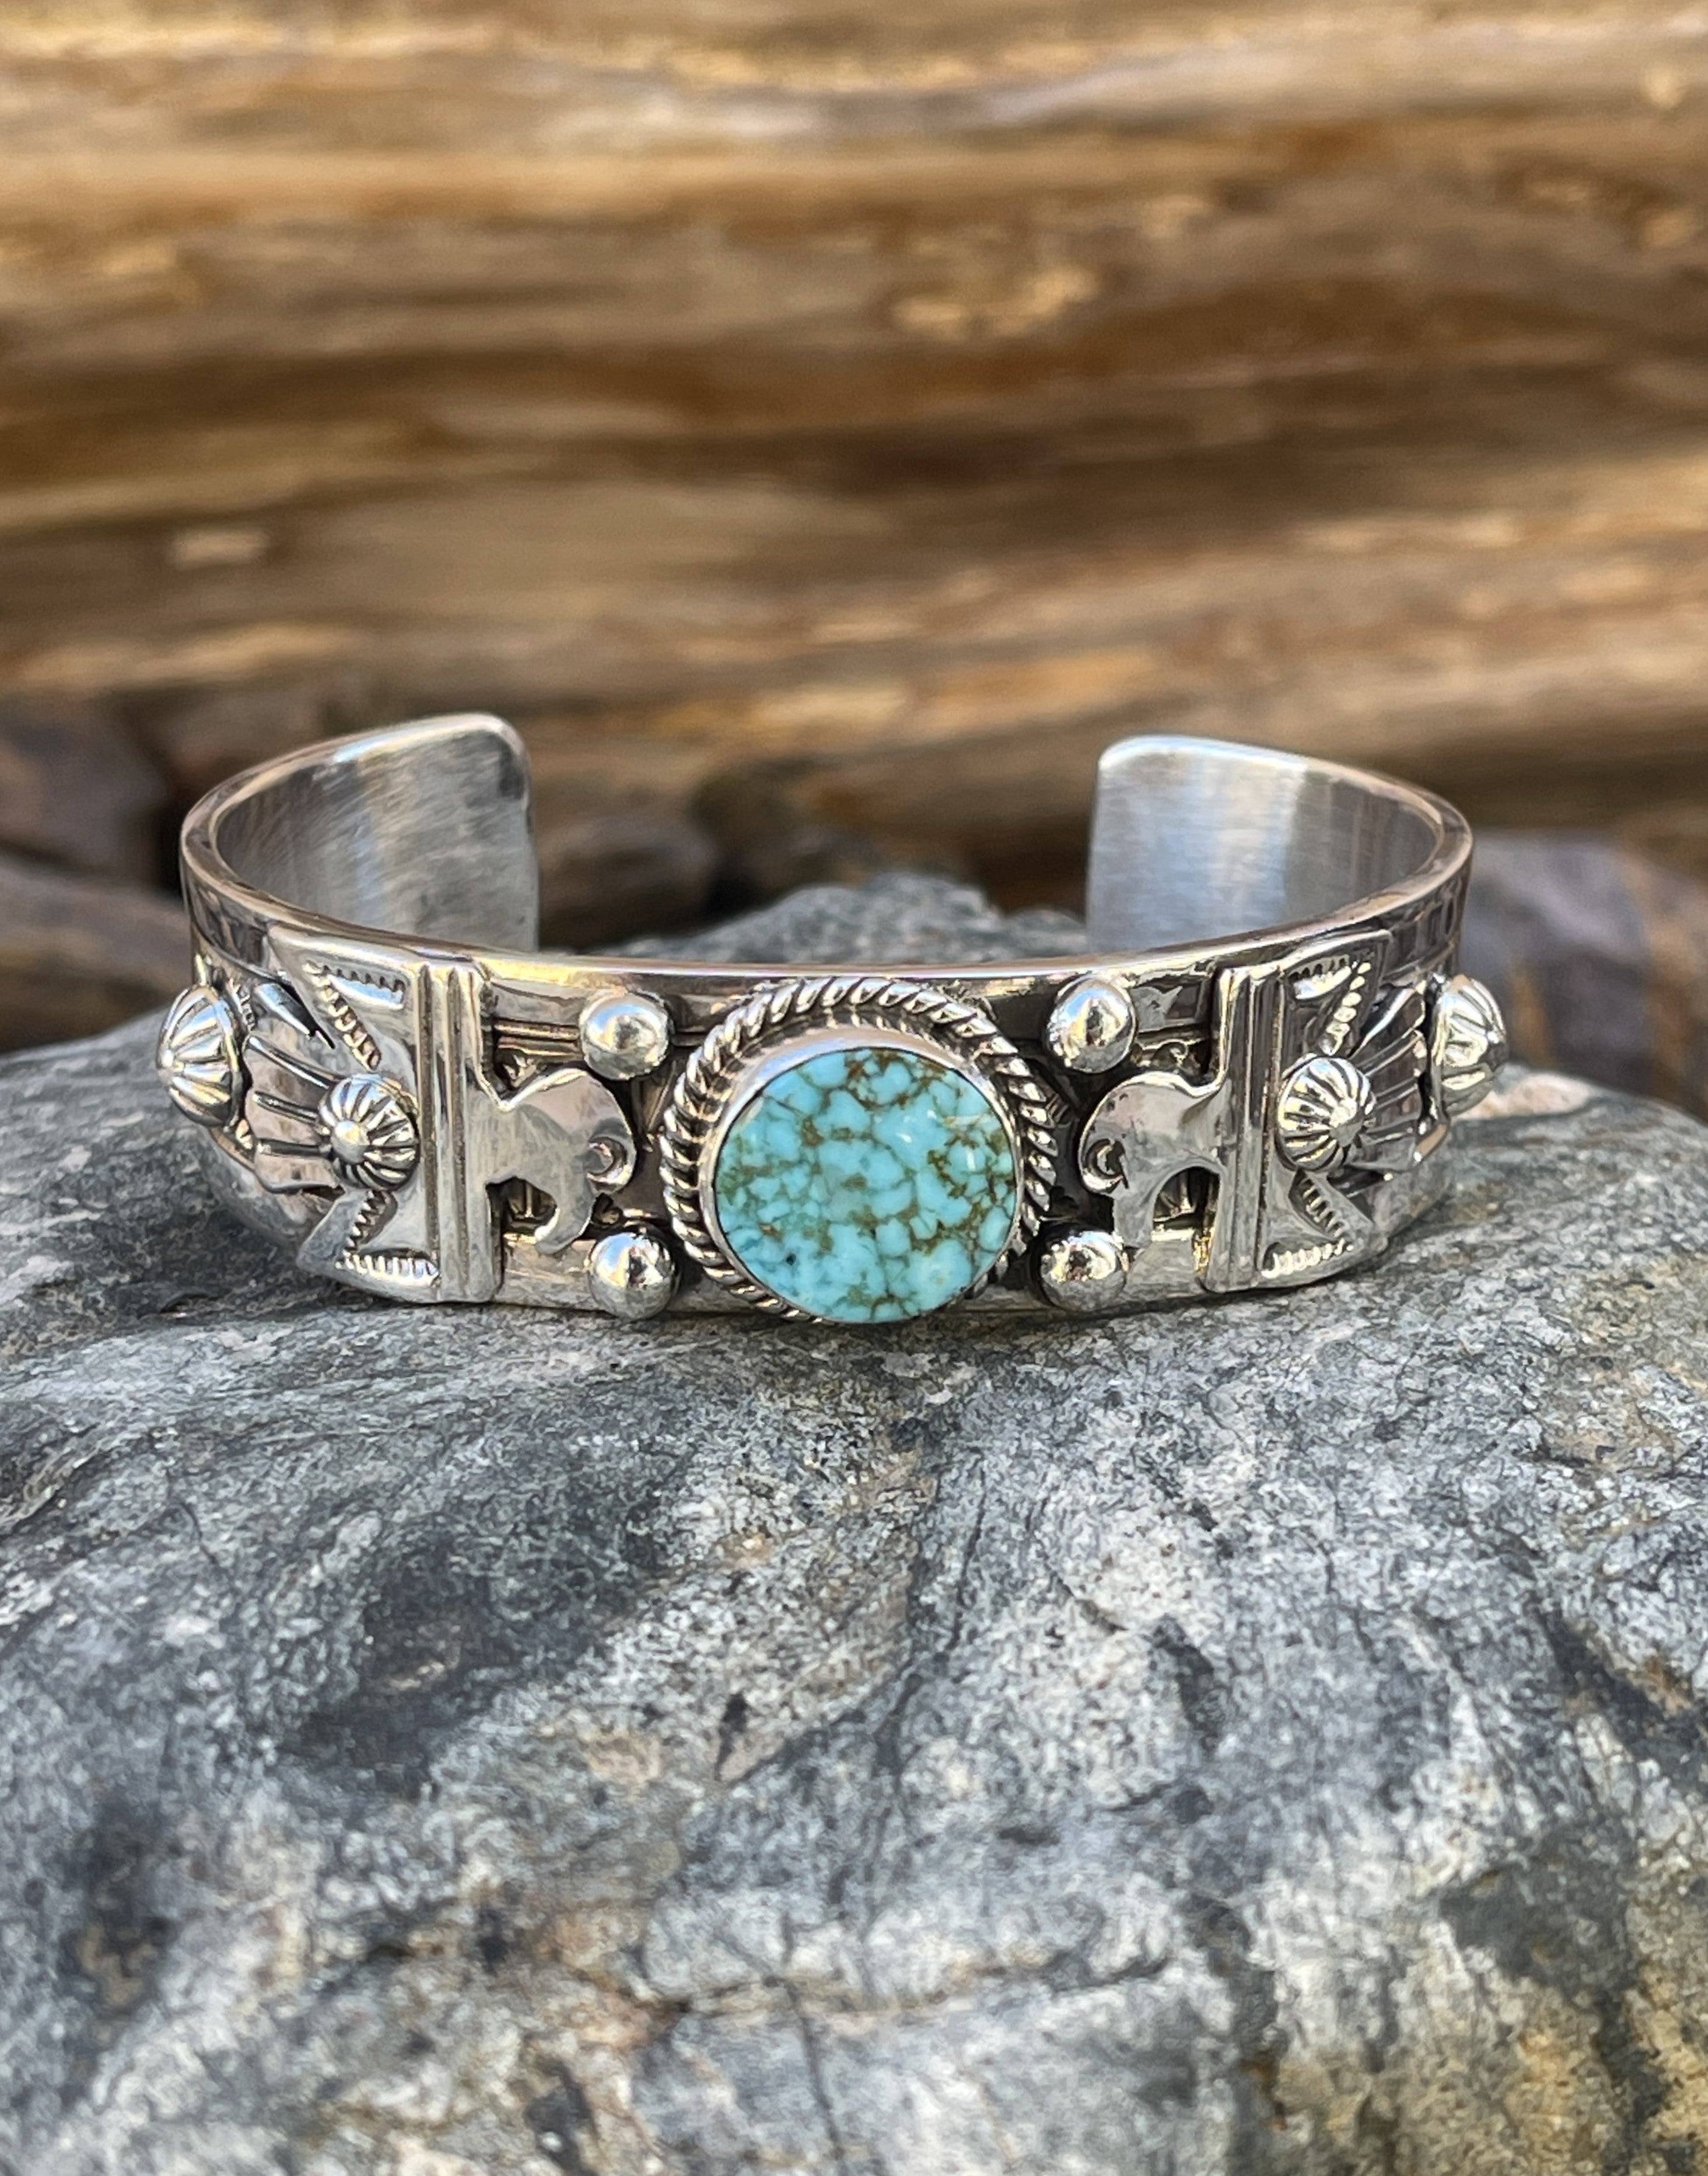 Handmade Solid Sterling Silver Turquoise Mountain Bracelet with Thunderbird Detail